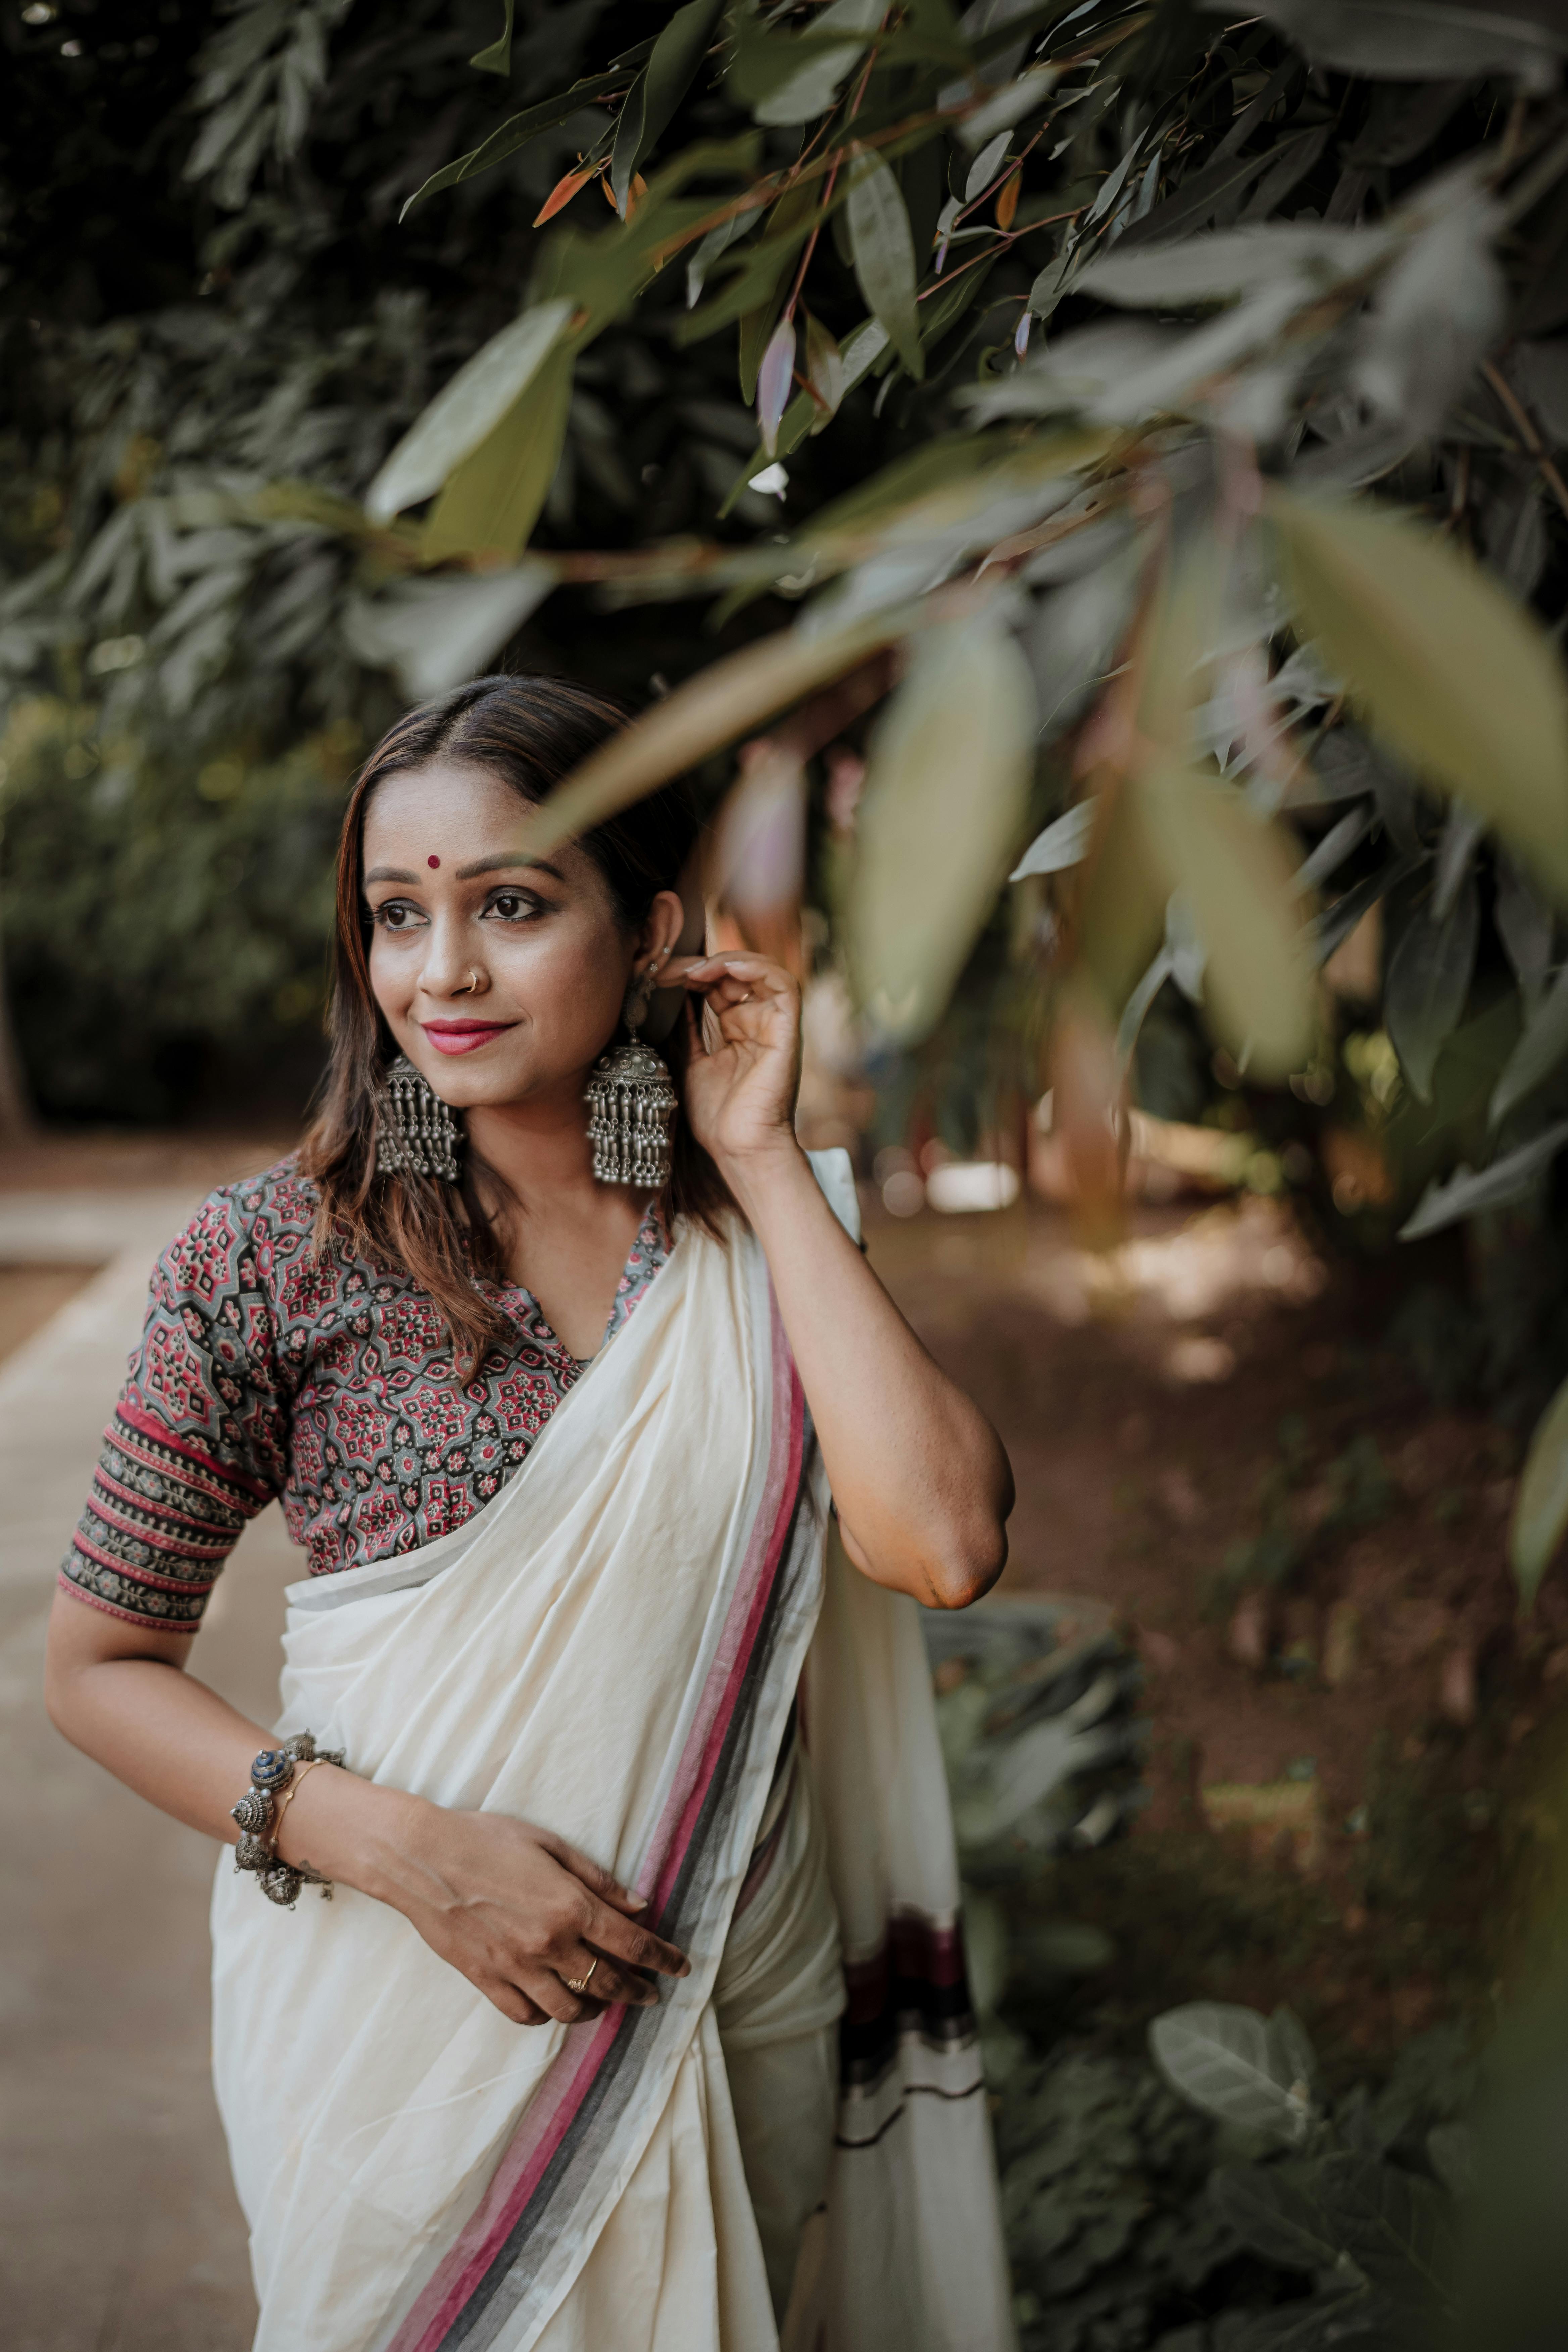 free photo of young woman in a saree standing outside